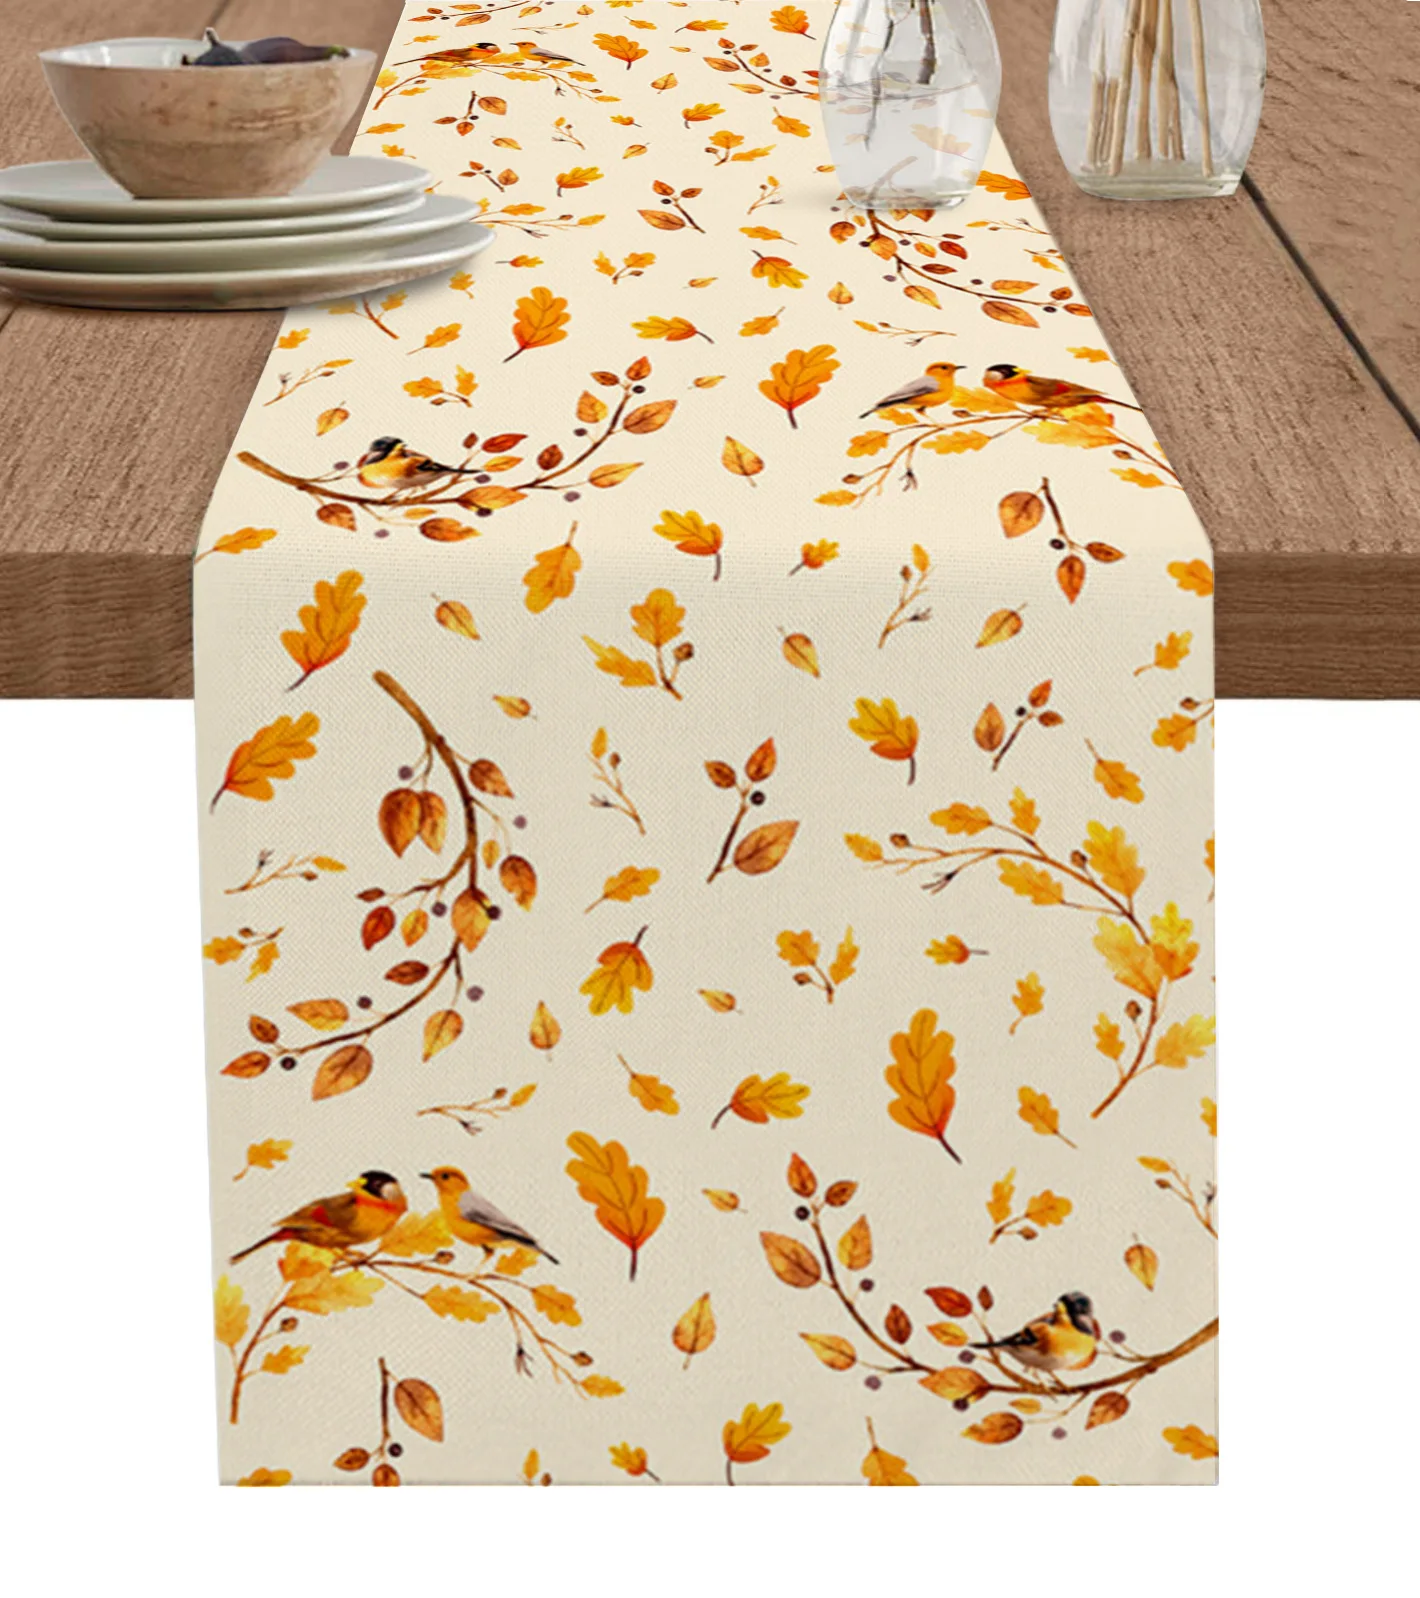 

Autumn Leaves Sparrows Nuts Branches Linen Table Runner Kitchen Table Decoration Farmhouse Dining Tablecloth Wedding Party Decor